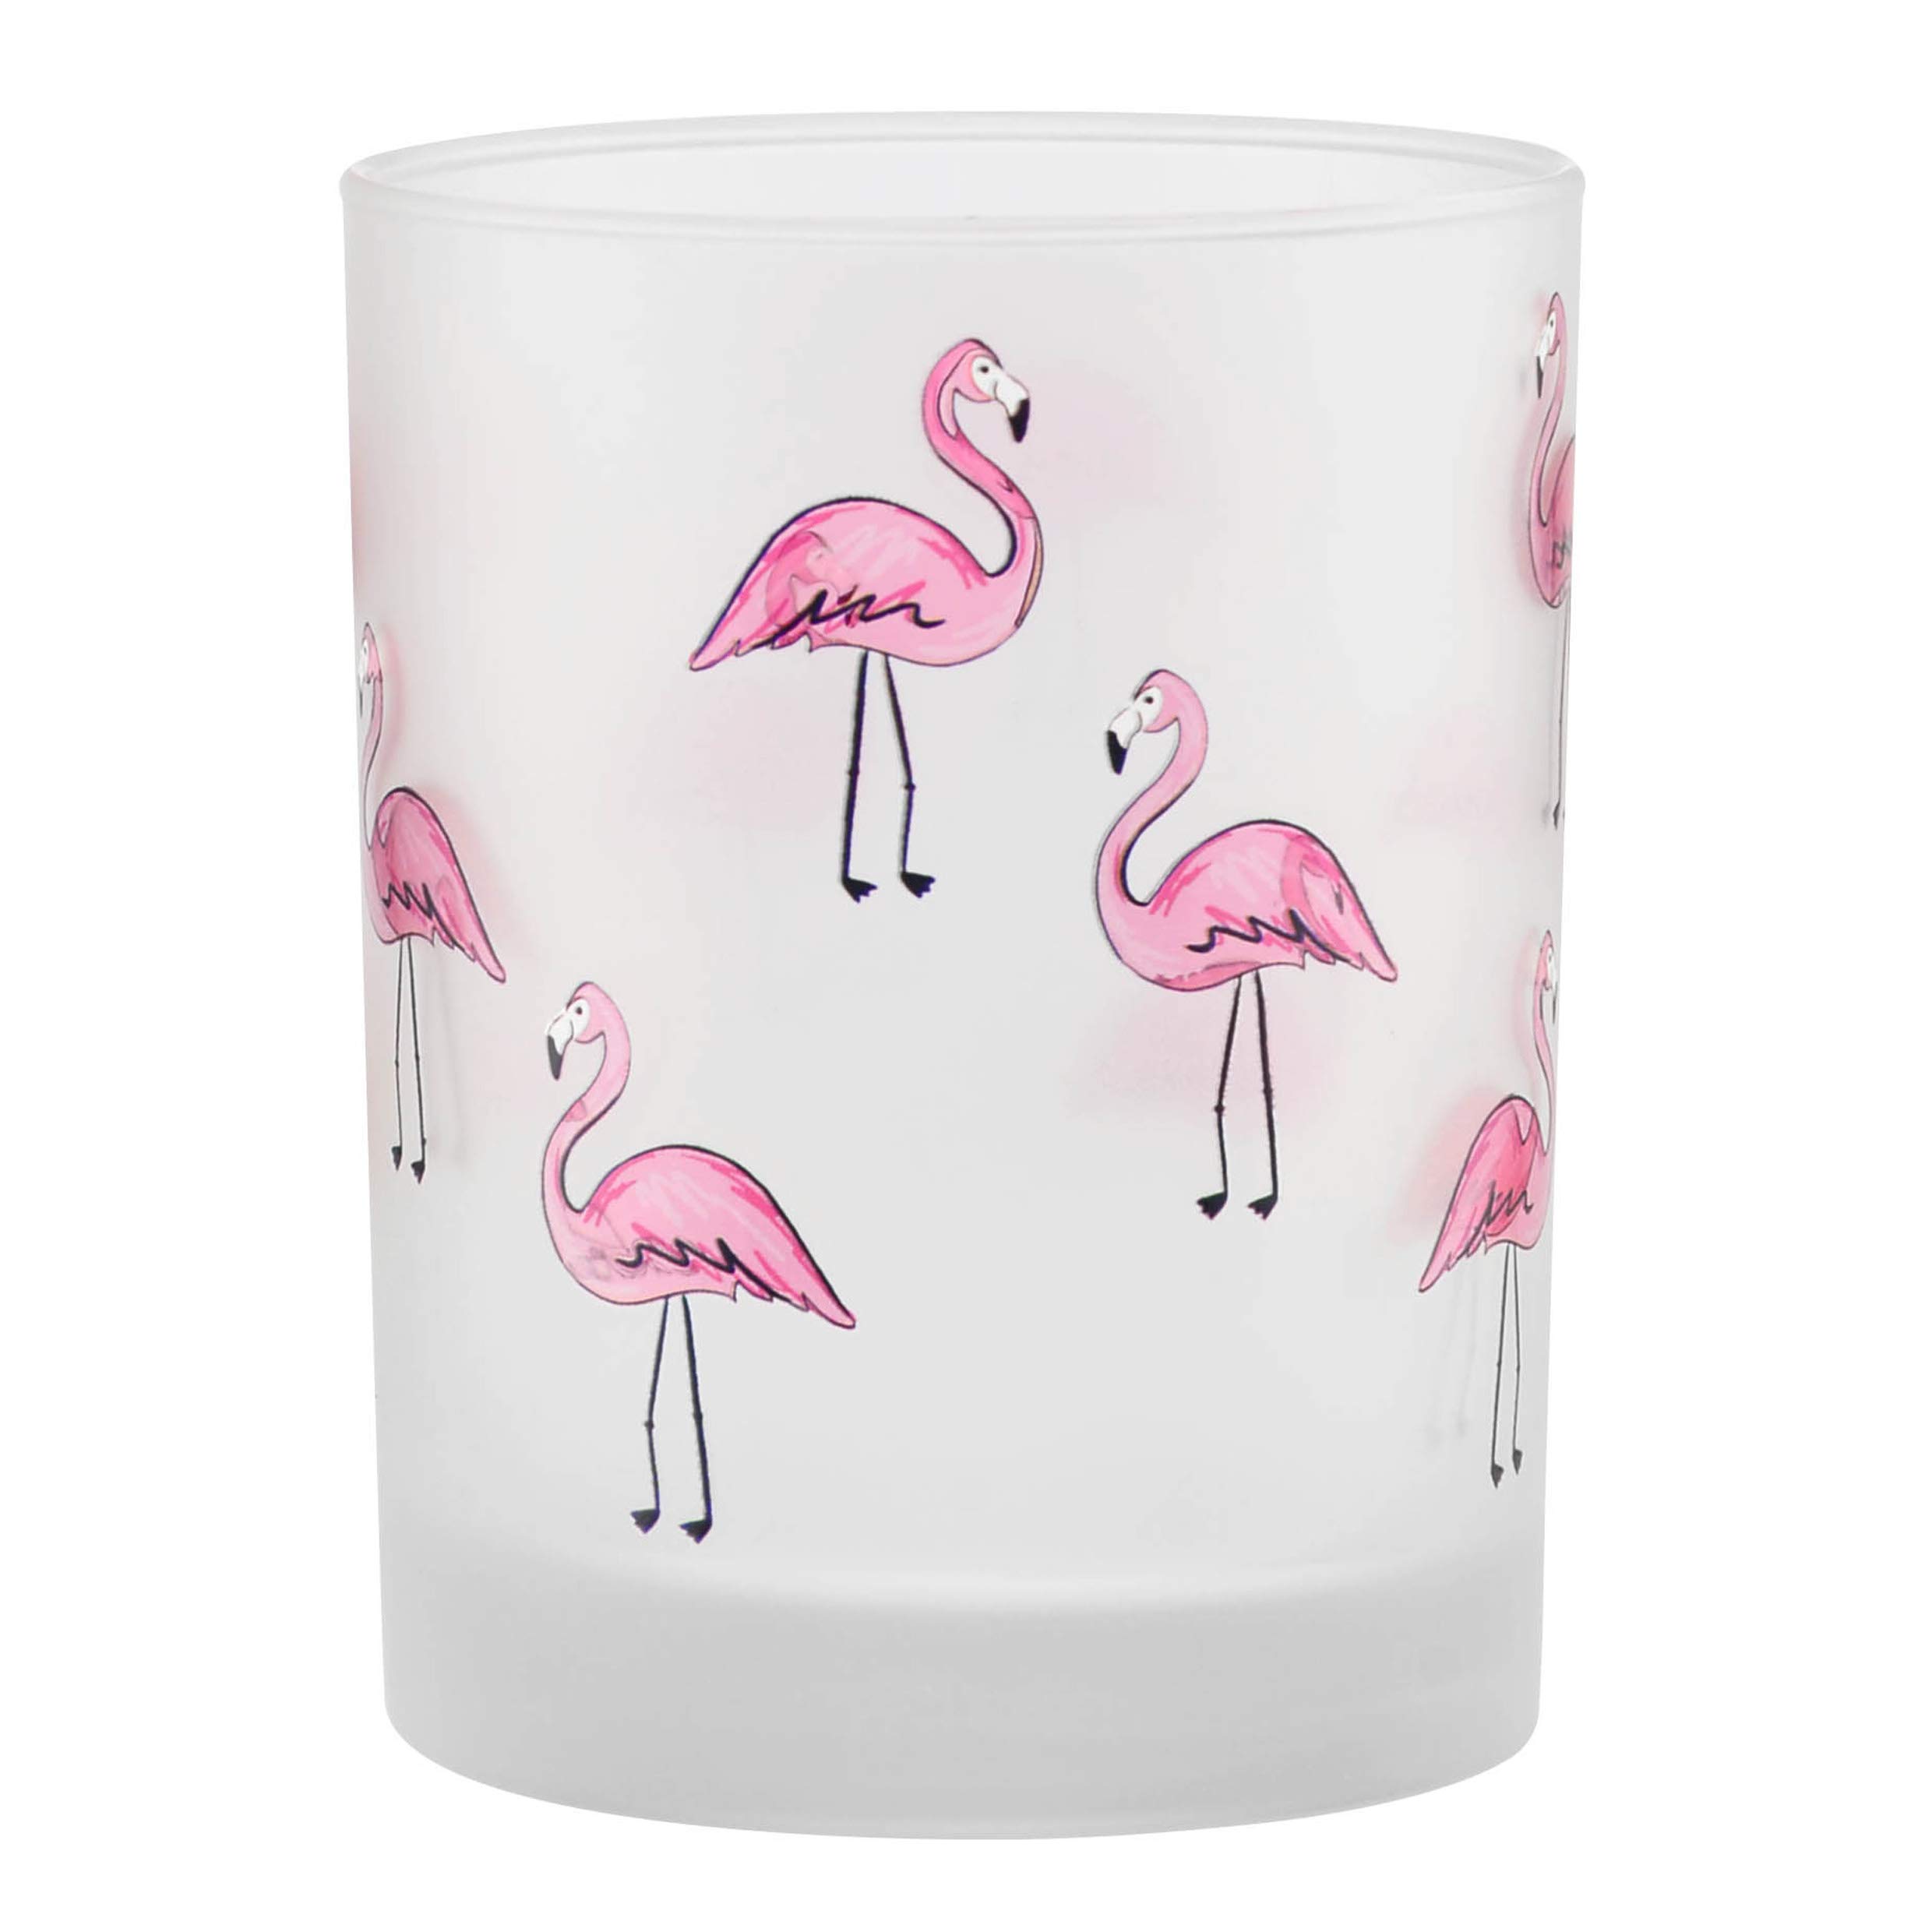 Culver Tropical Decorated Frosted Double Old Fashioned Tumbler Glasses, 13.5-Ounce, Gift Boxed Set of 2 (Flamingos)